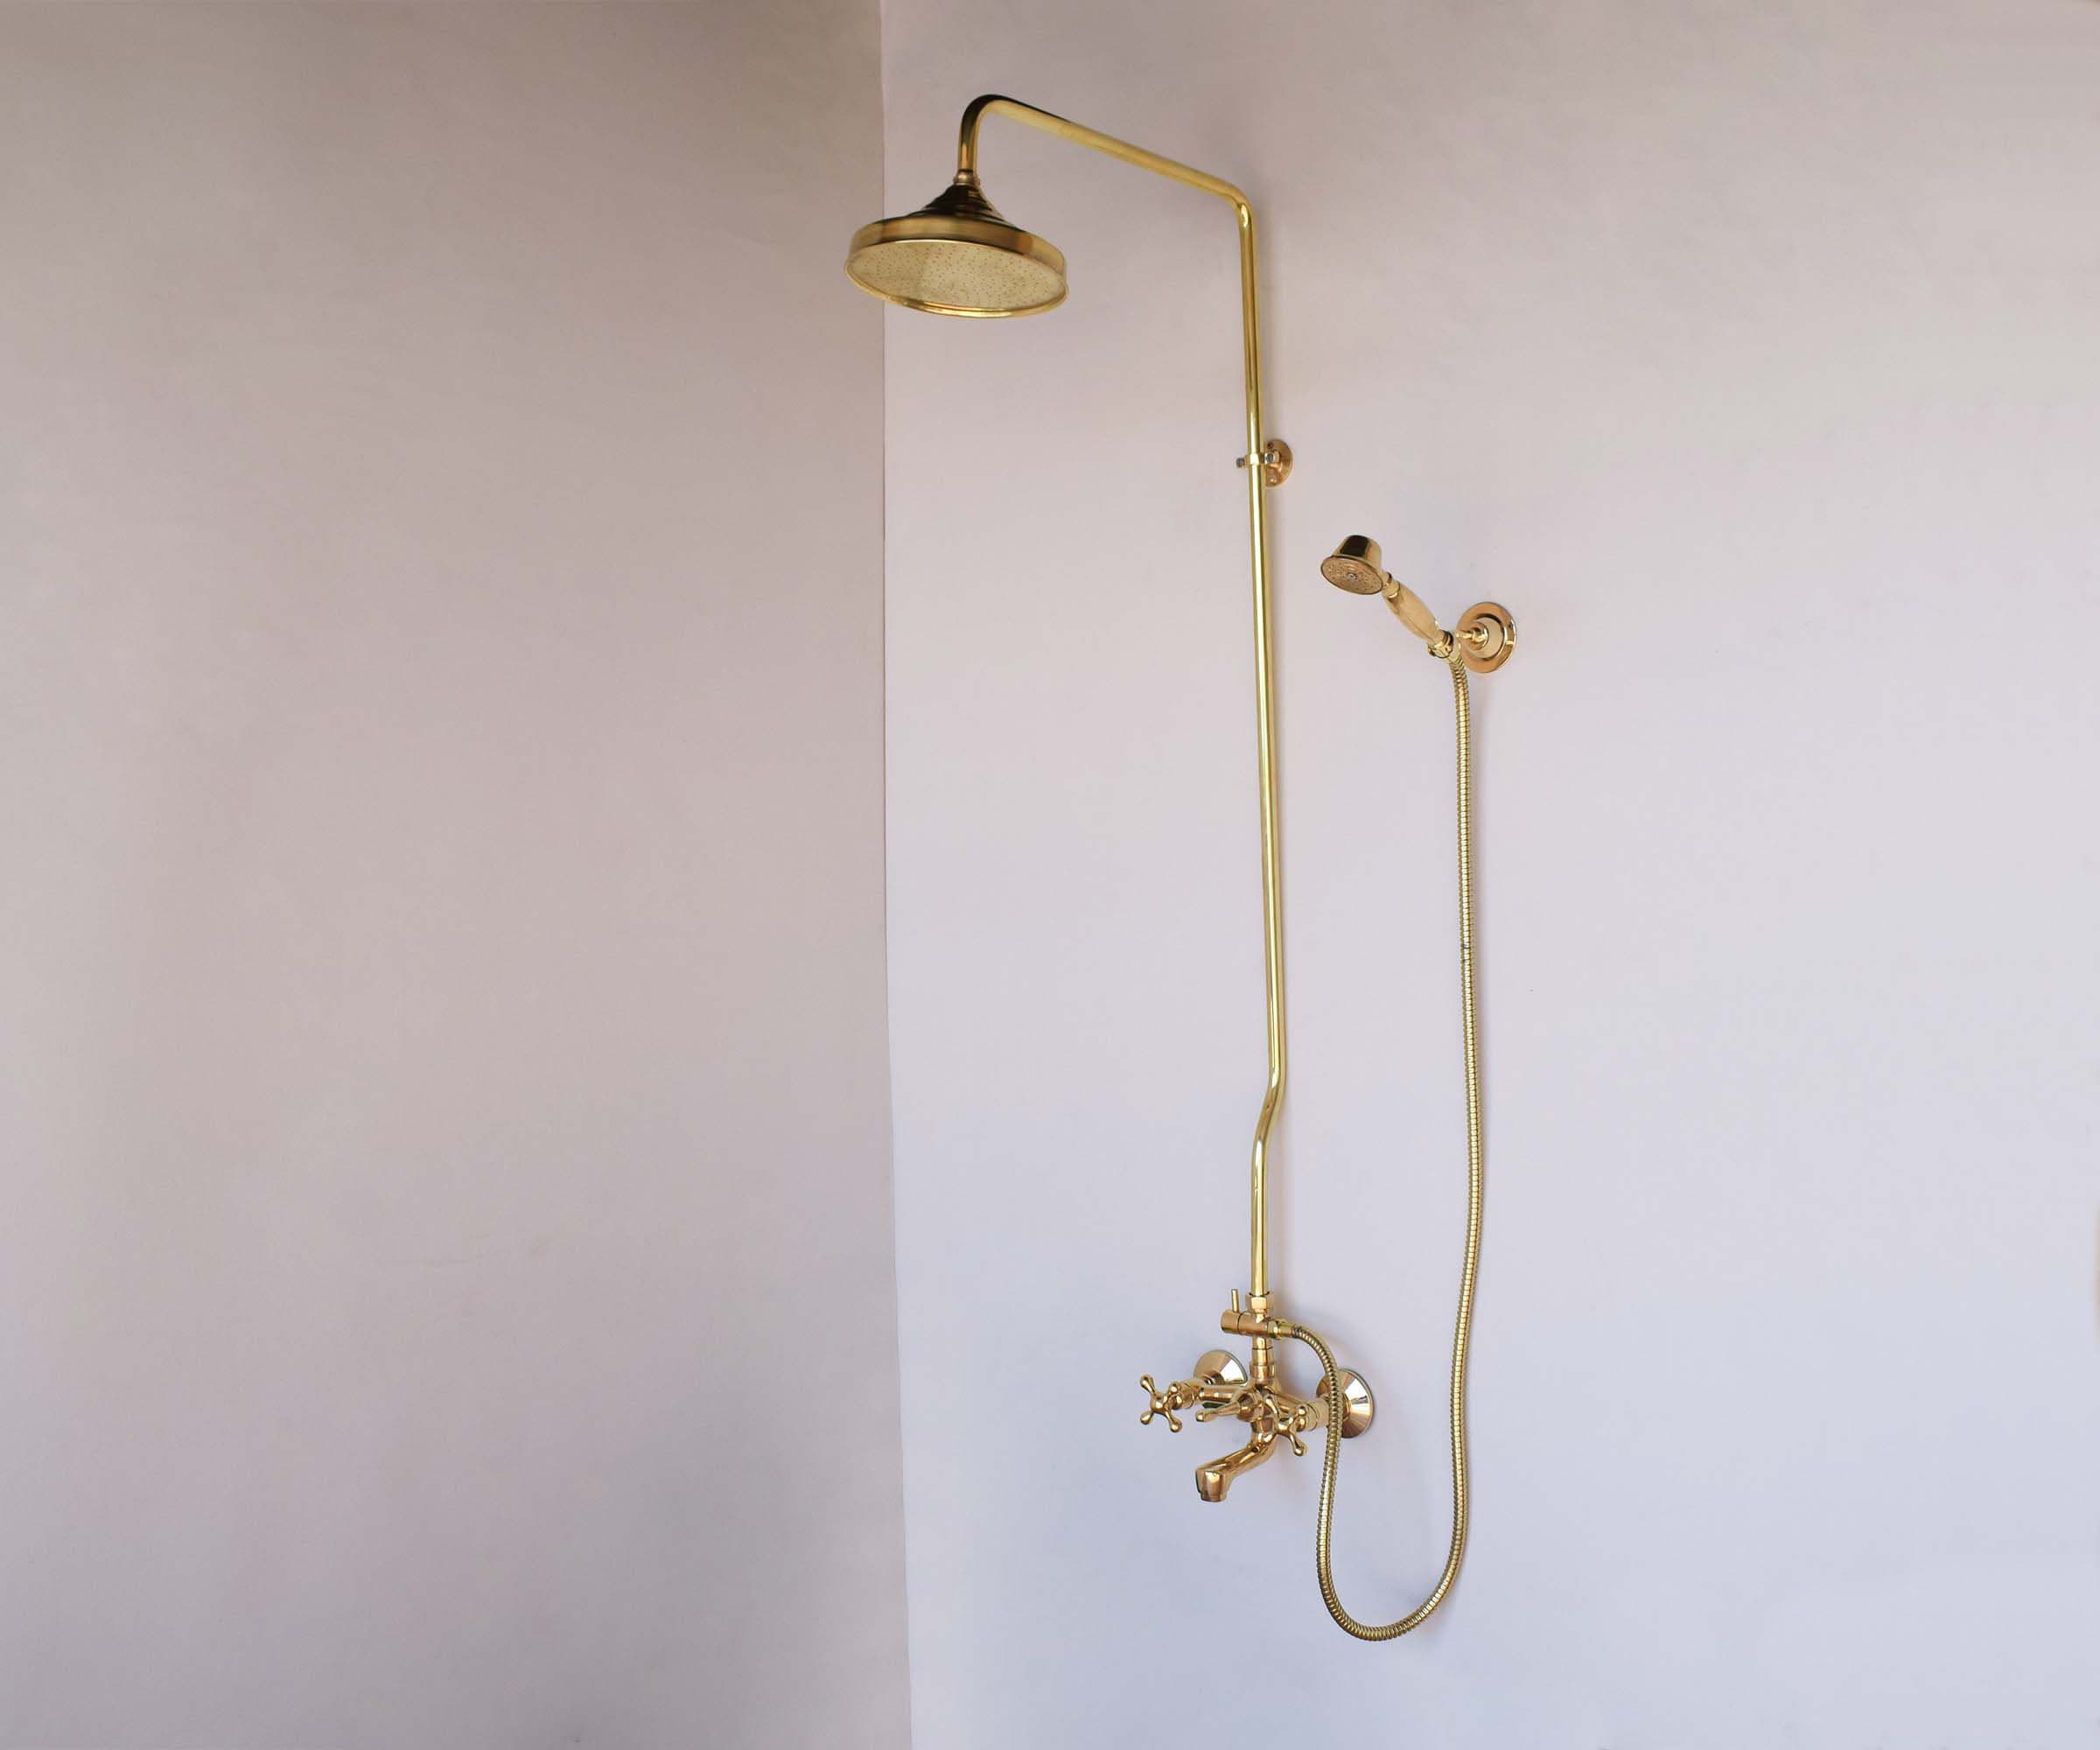 Unlacquered Brass Exposed shower system with tub spout and Handheld Shower and Rain Shower Head - Zayian